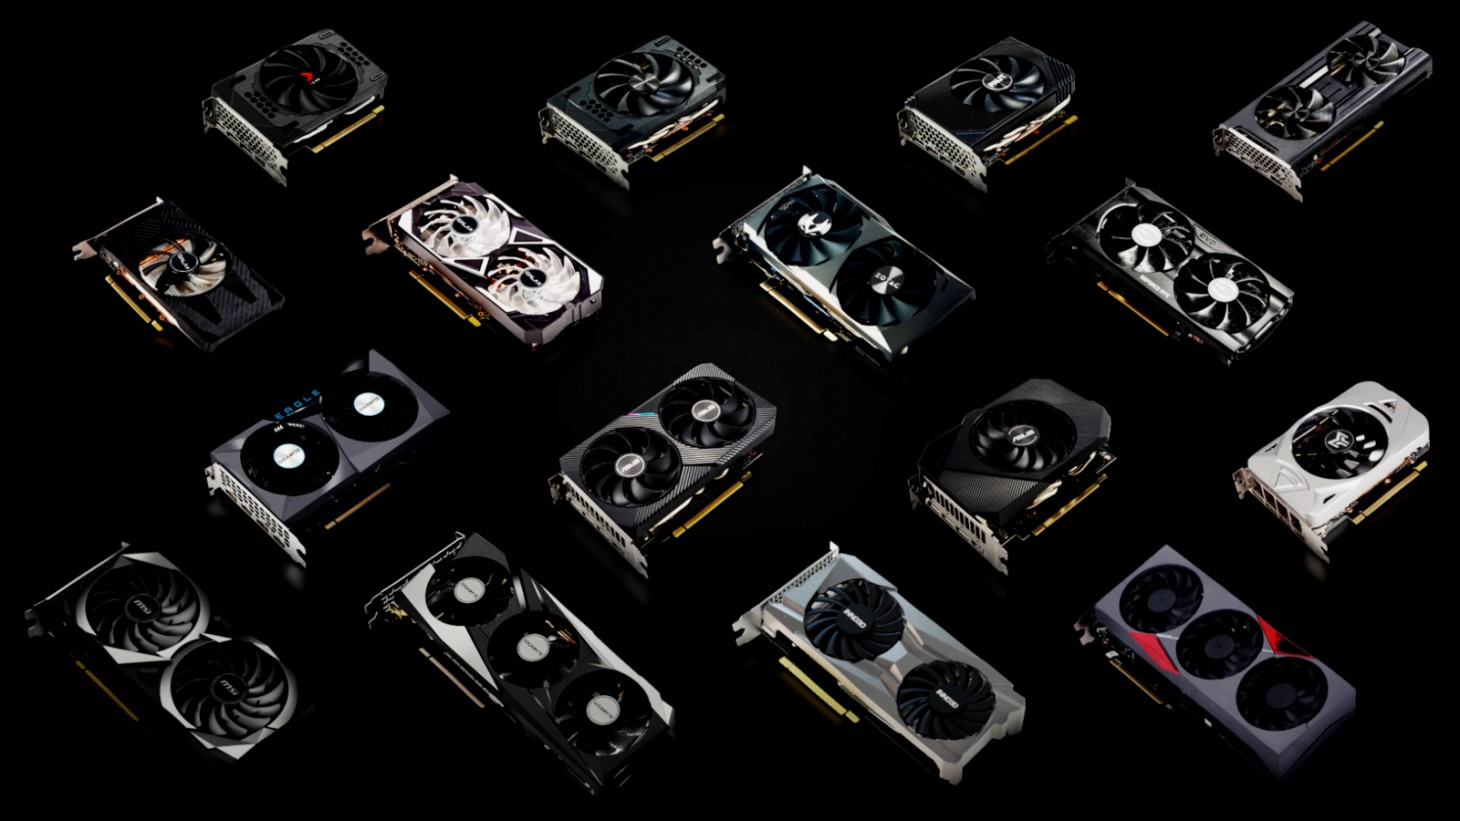 All The New Graphics Cards Revealed Today By AMD, Intel, And Nvidia